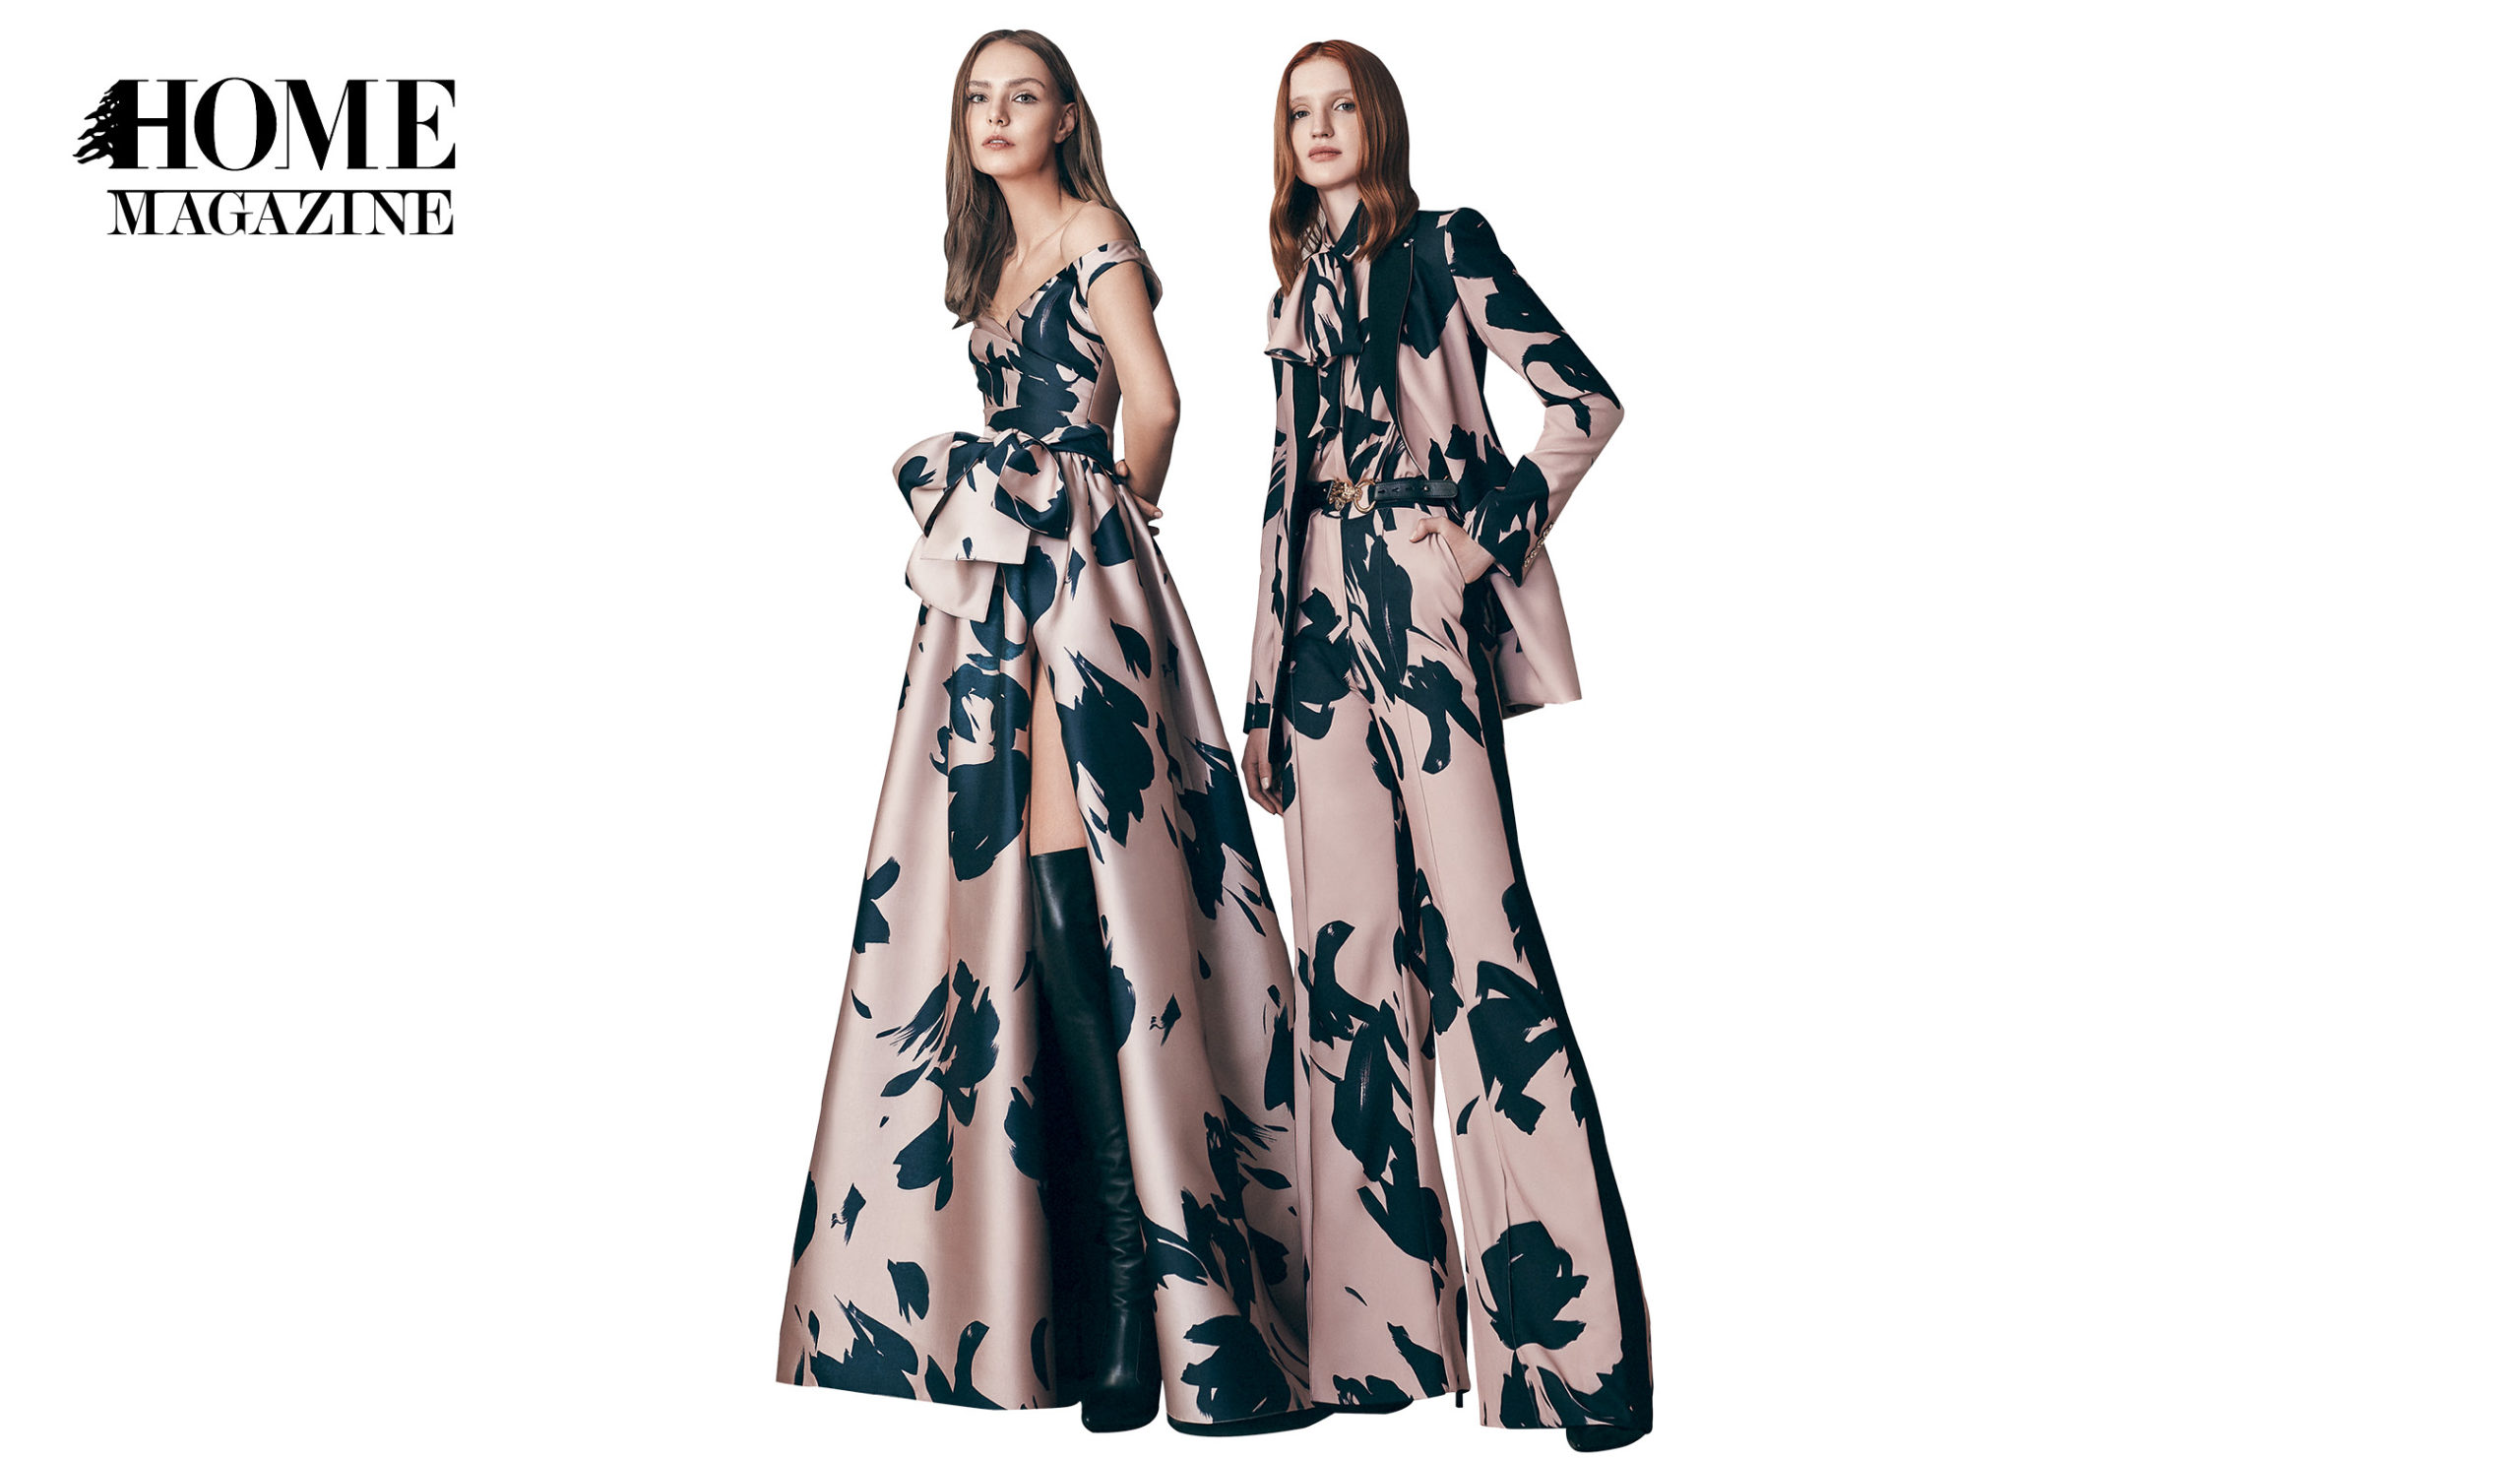 Two models wearing flower printed black and bronze dresses